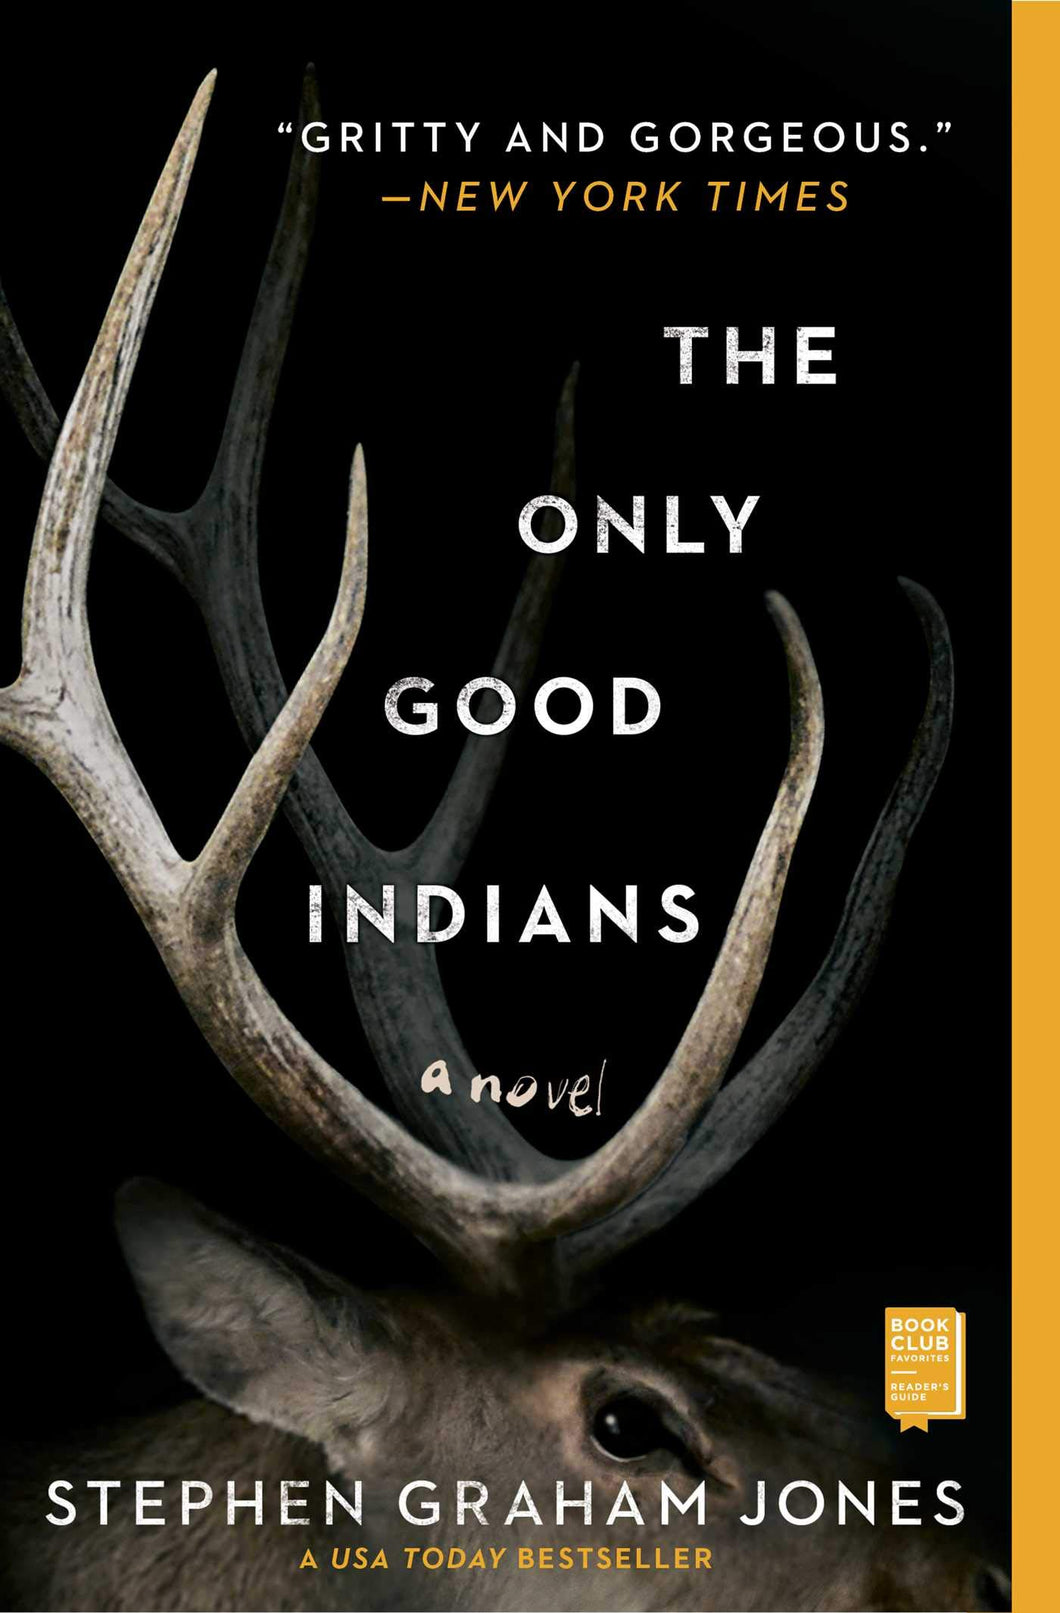 The Only Good Indians: A Novel by Stephen Graham Jones